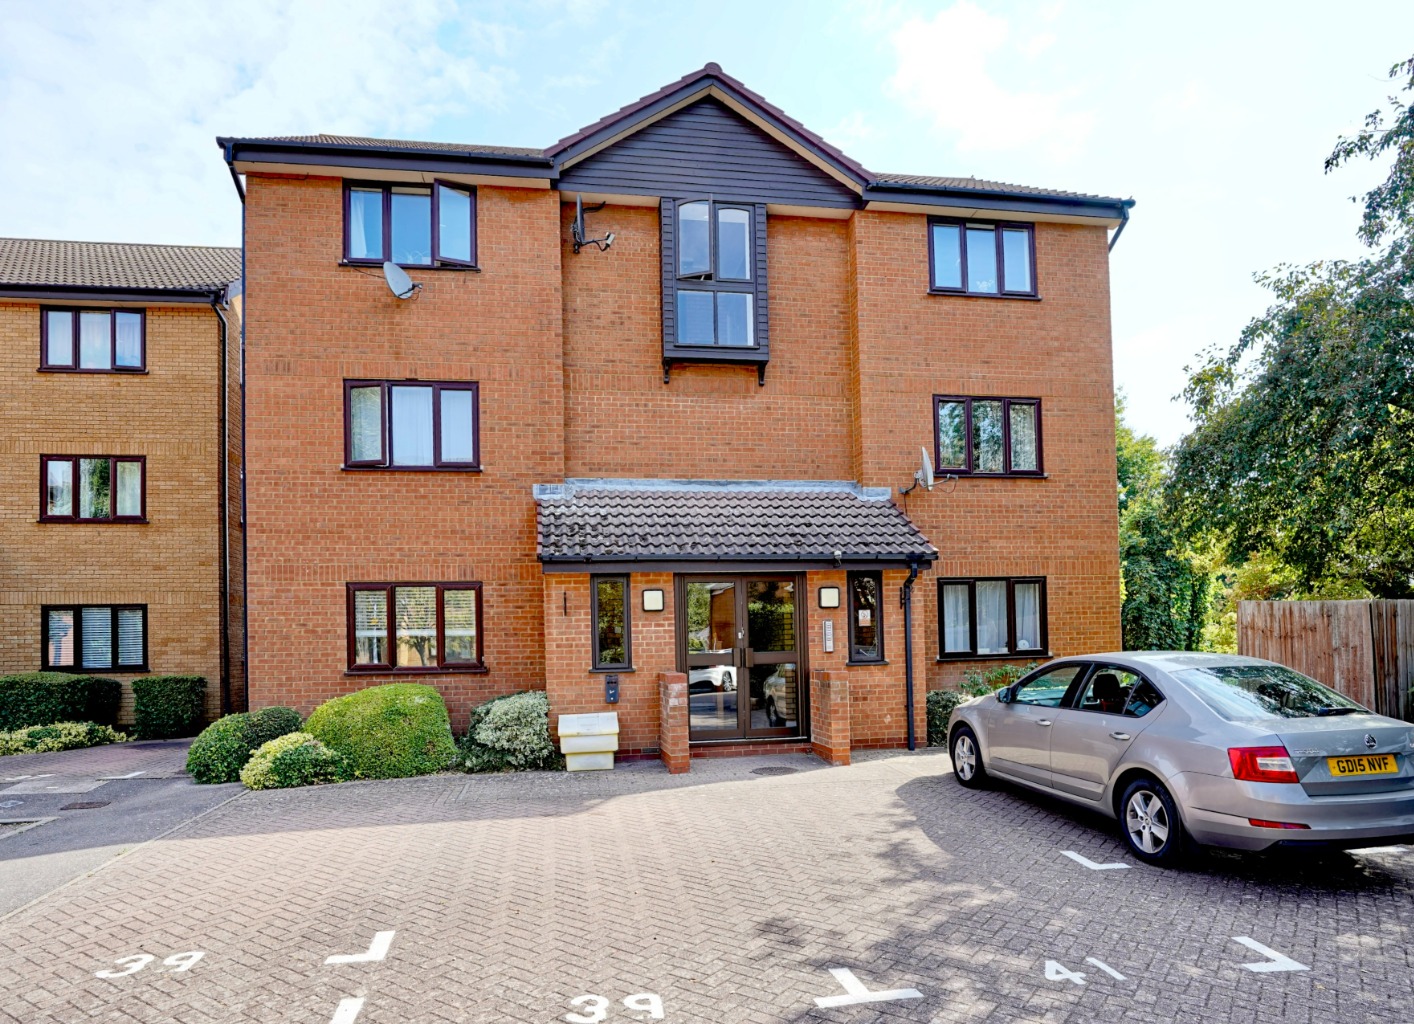 2 bed flat for sale in Ullswater, Huntingdon 0